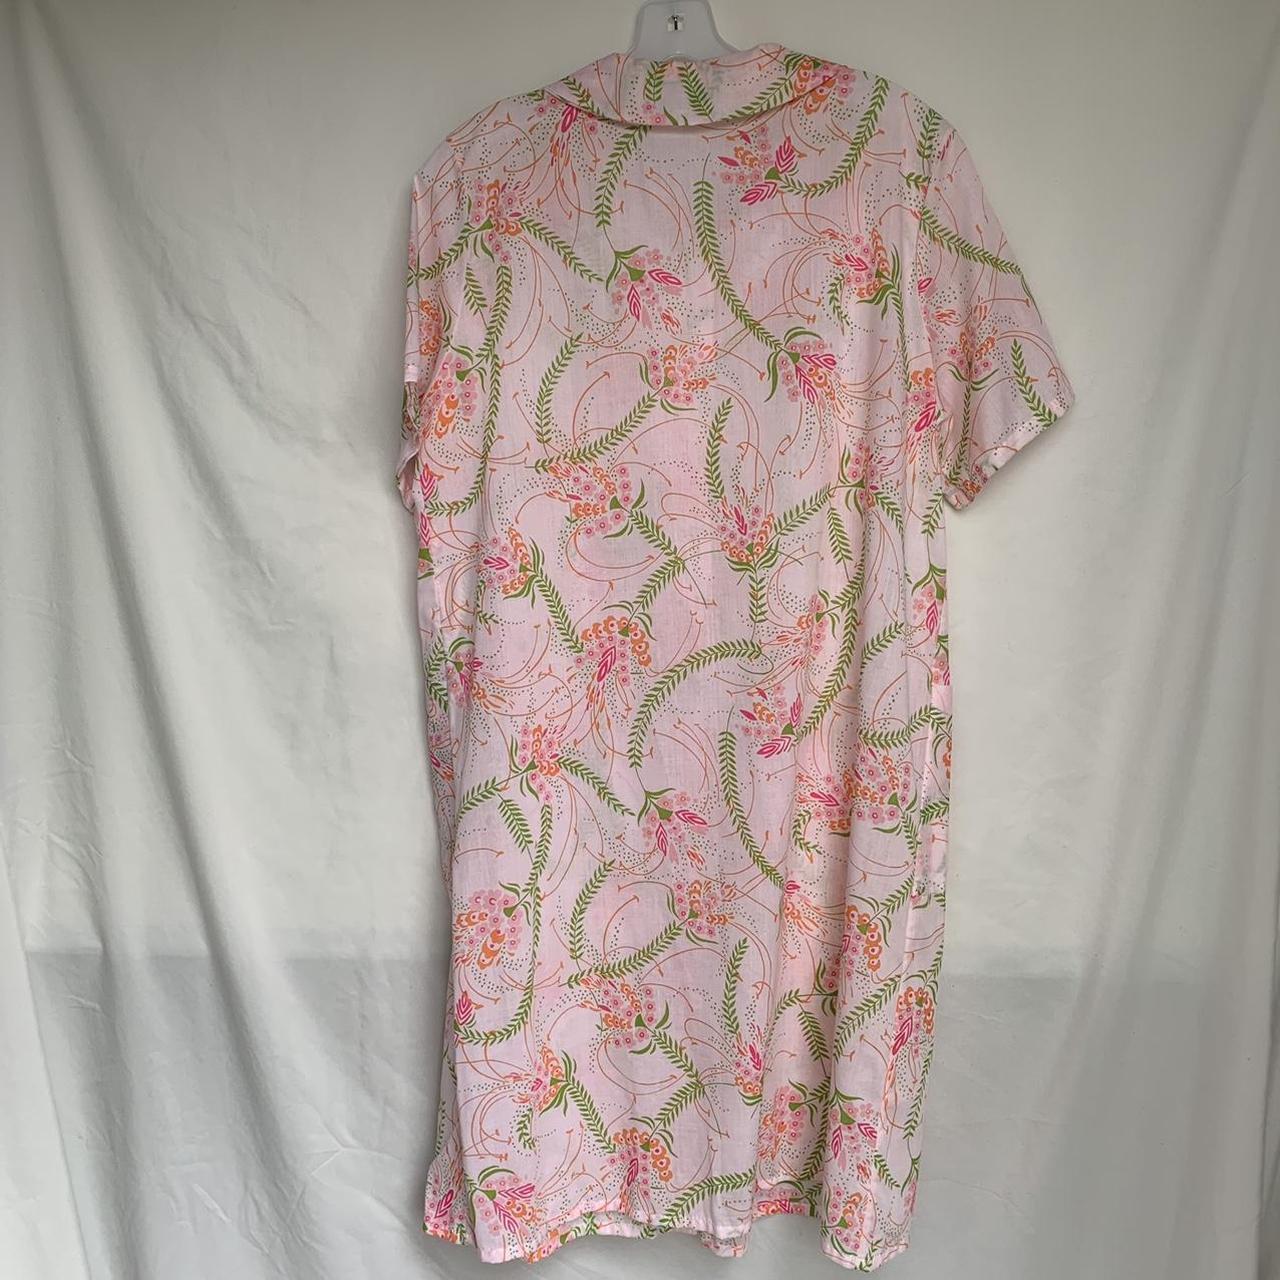 Vintage baby pink floral house dress. Very cute and... - Depop